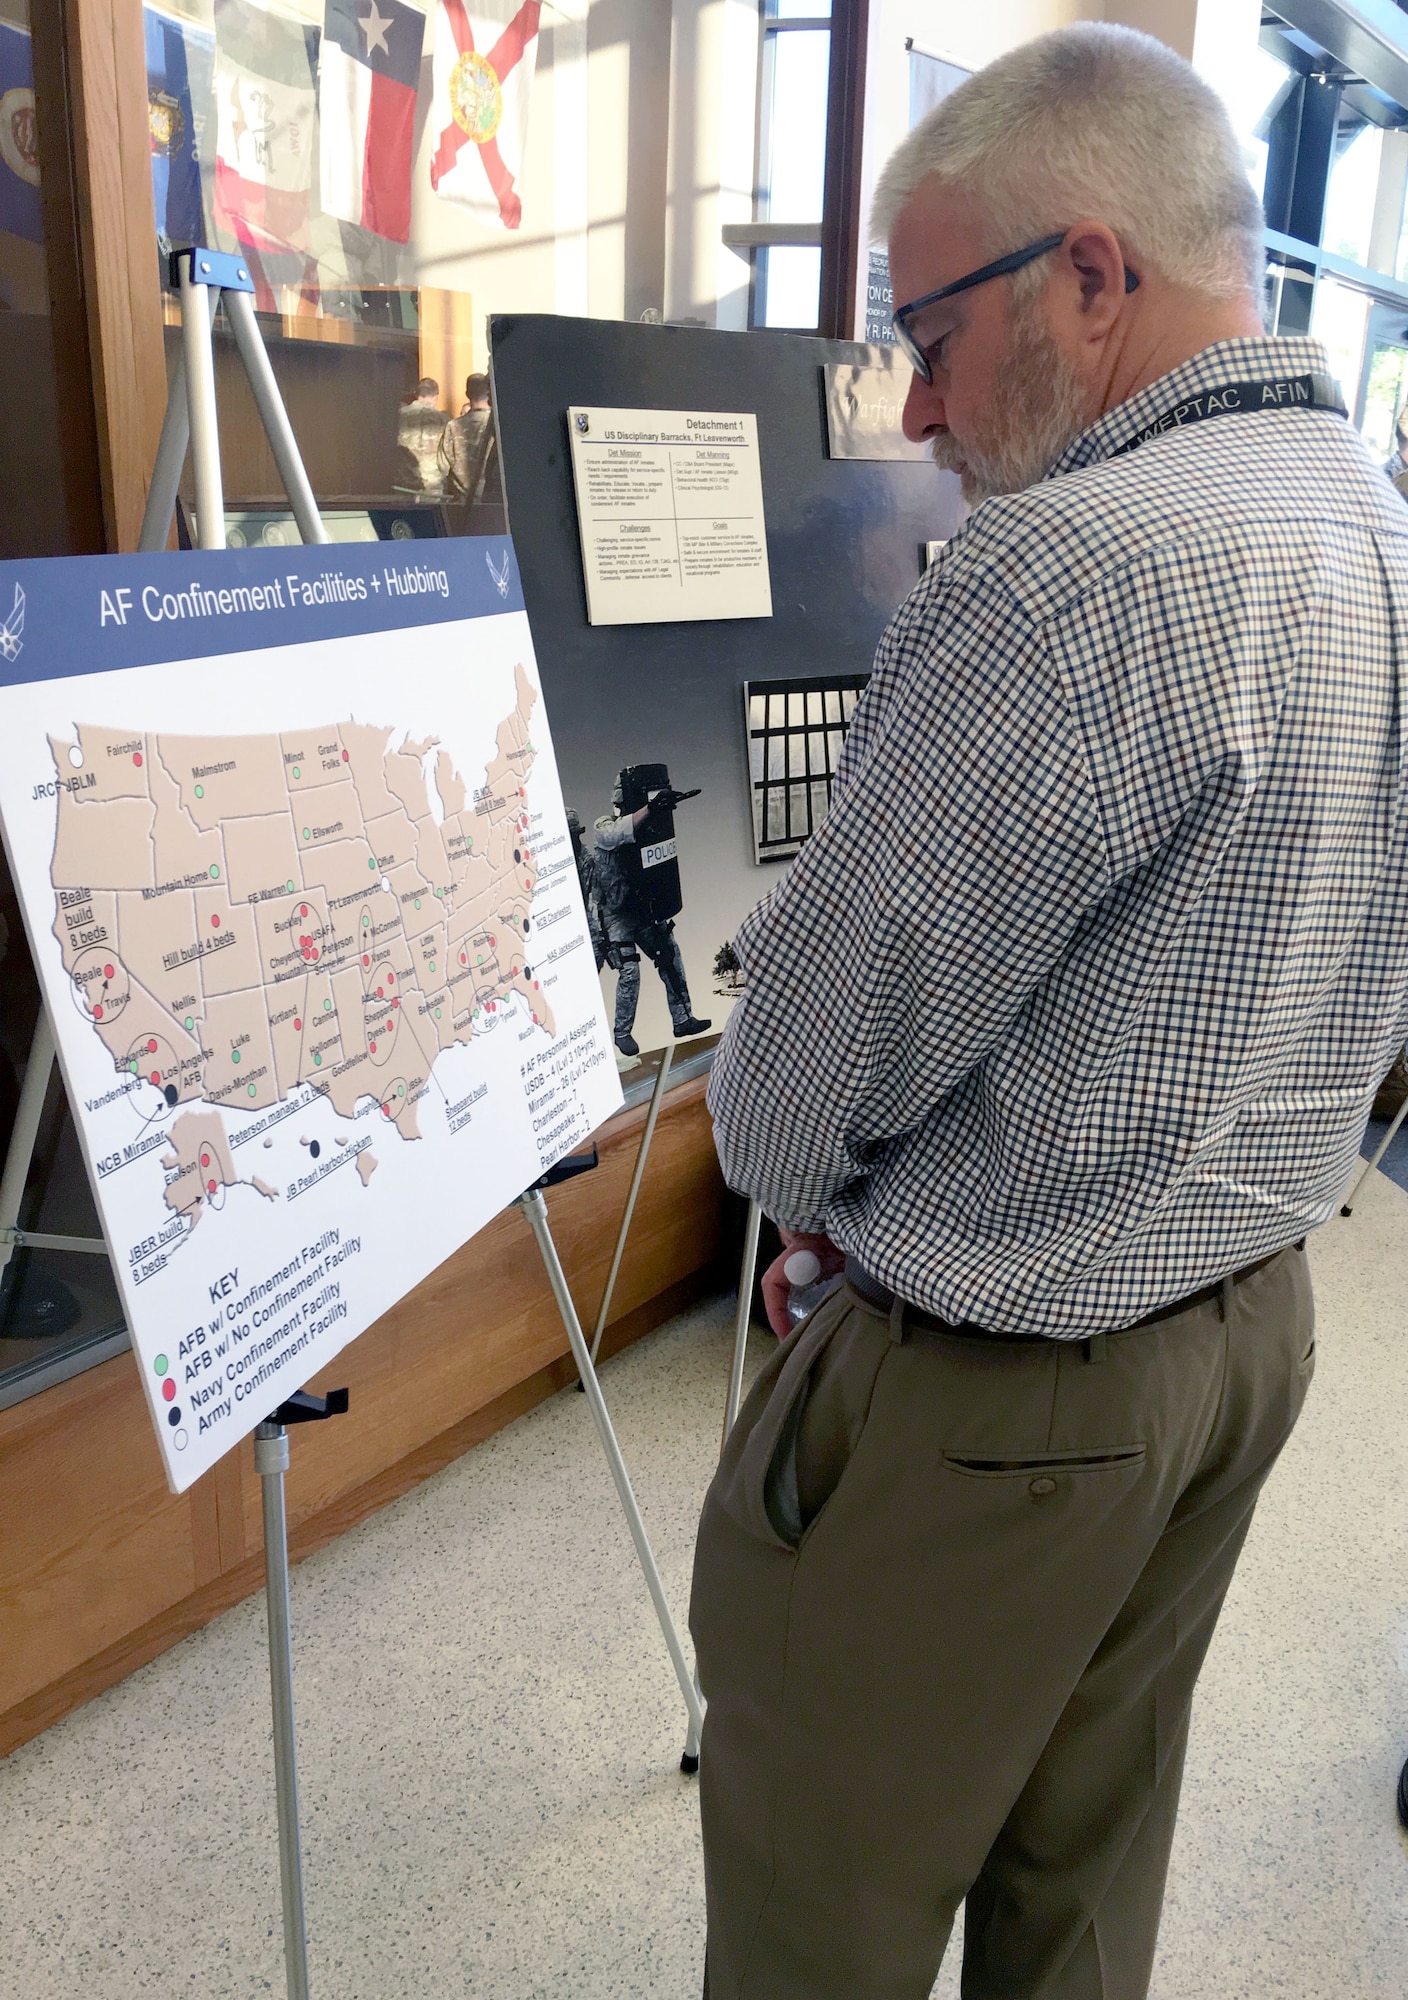 Joe Hart of the Air Force Civil Engineer Center views a security forces display in the lobby of the Pfingston BMT Reception Center at Joint Base San Antonio-Lackland during a break in the Installation and Mission Support Weapons and Tactics Conference outbriefs April 10.